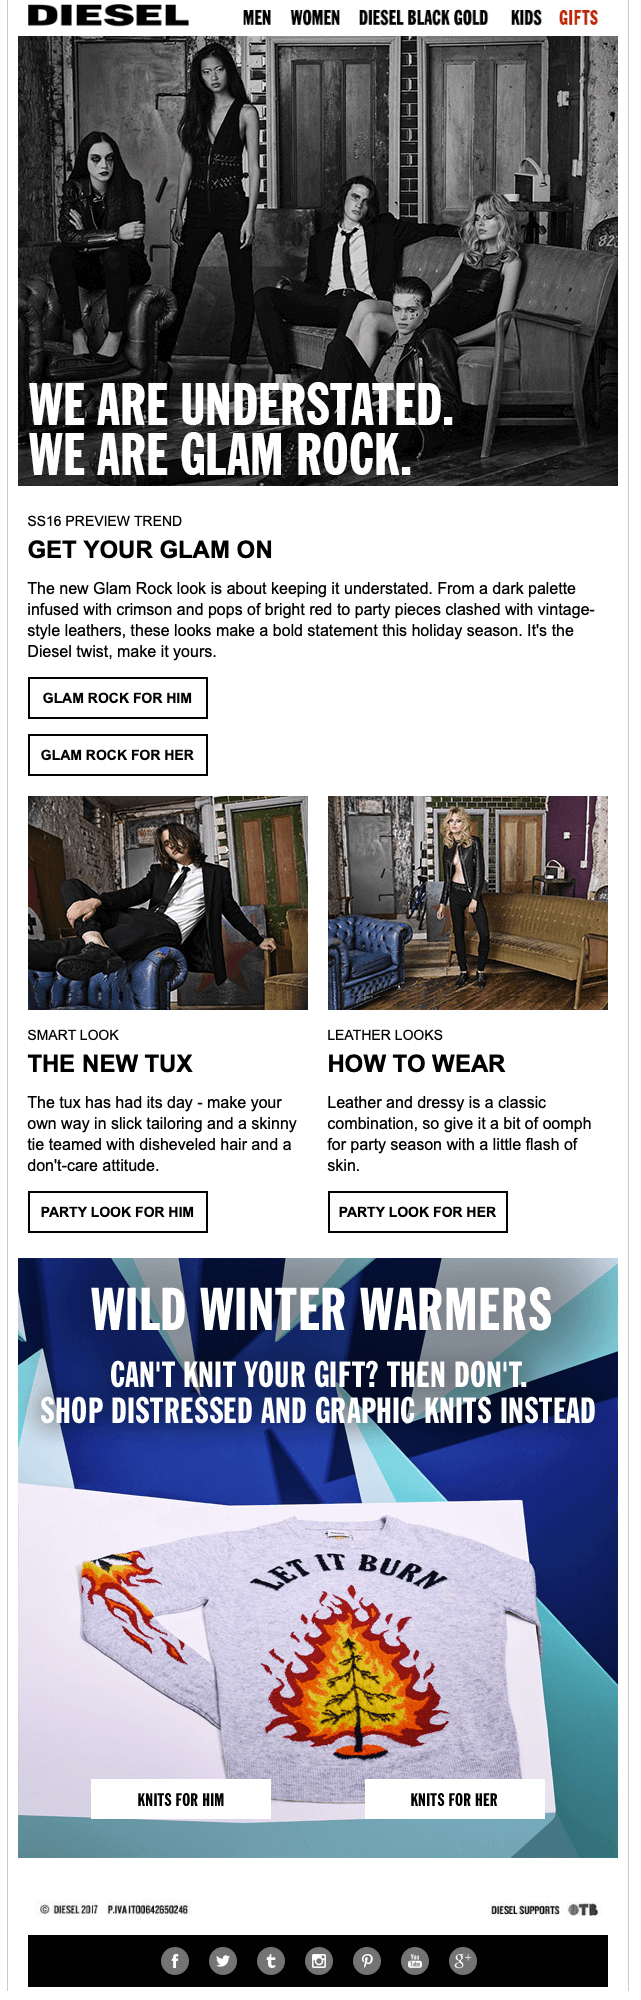 Holiday Email Example by Diesel